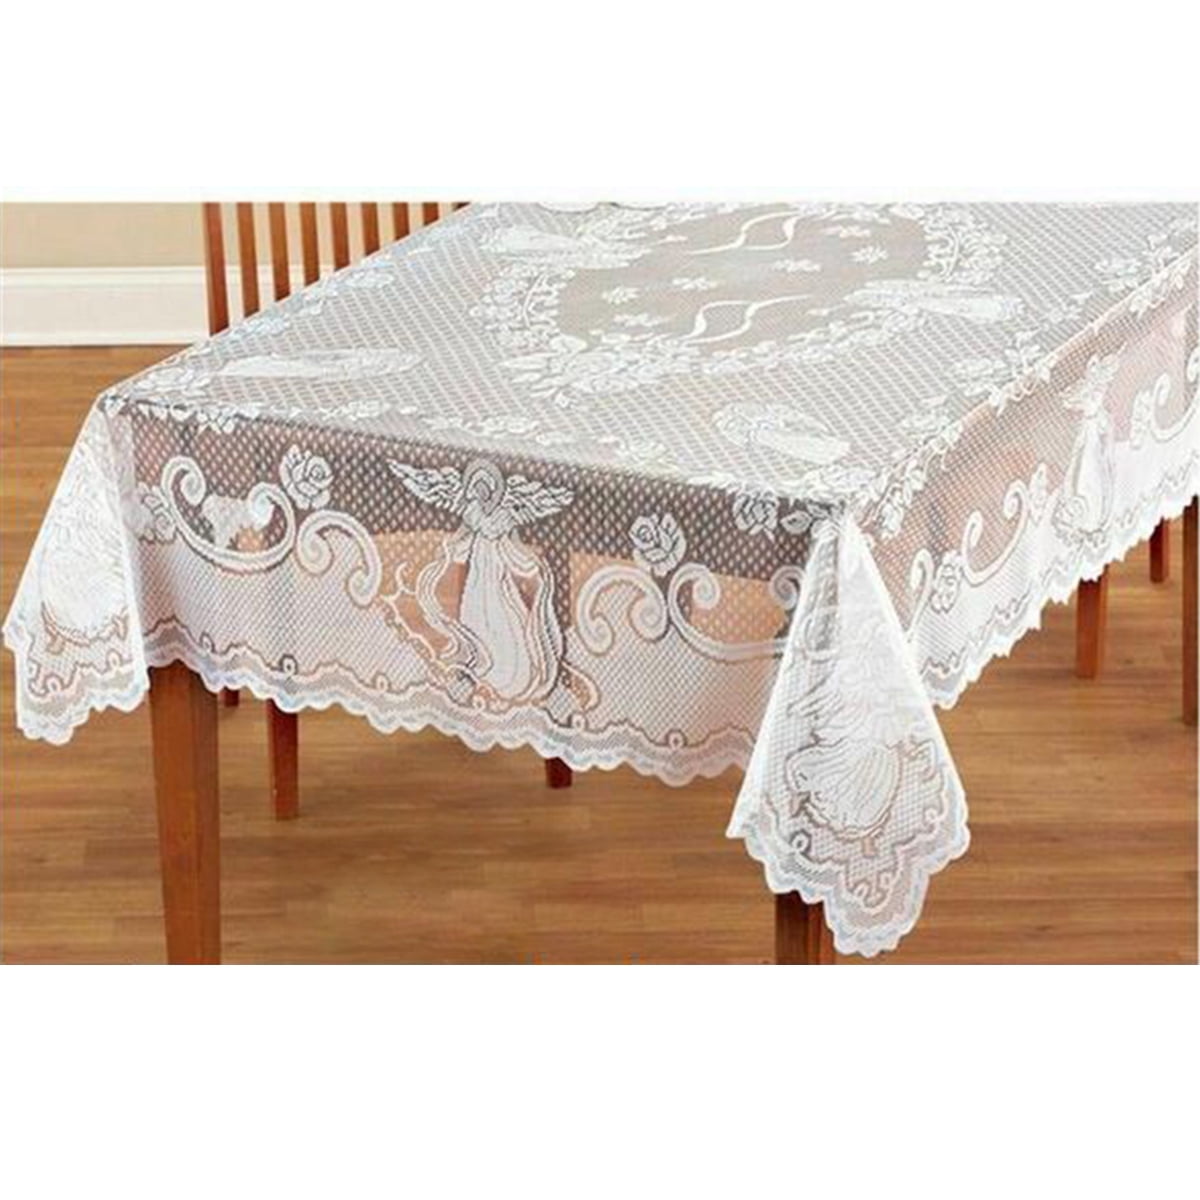 White Vintage Lace Tablecloth Floral knitted Table Cover Rectangle Wedding Decor 